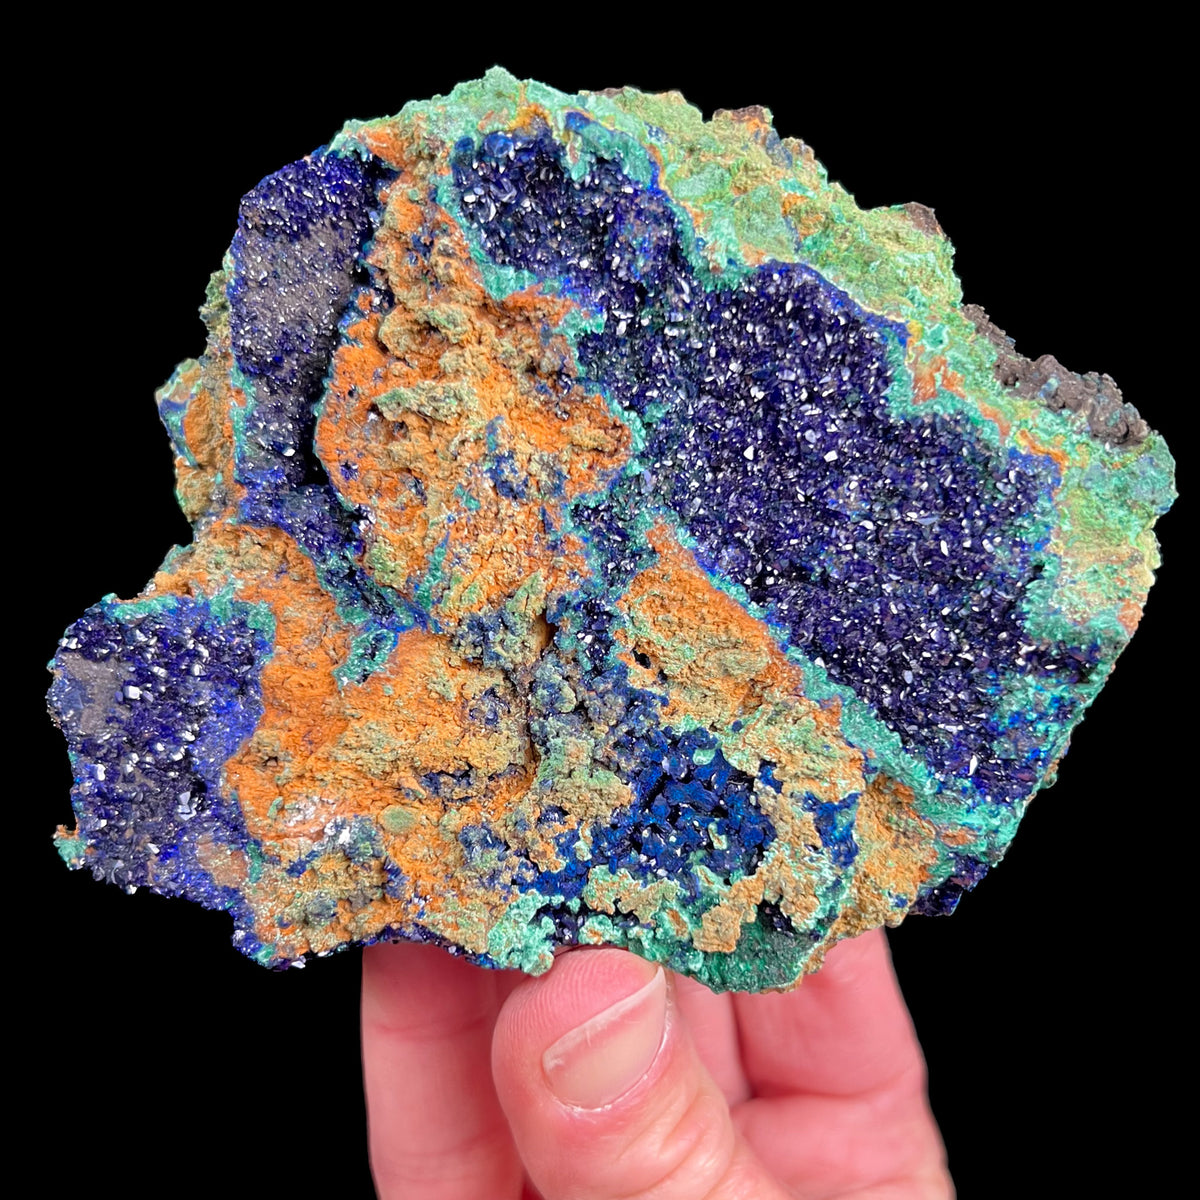 Azurite with Malachite Crystal Specimen from China